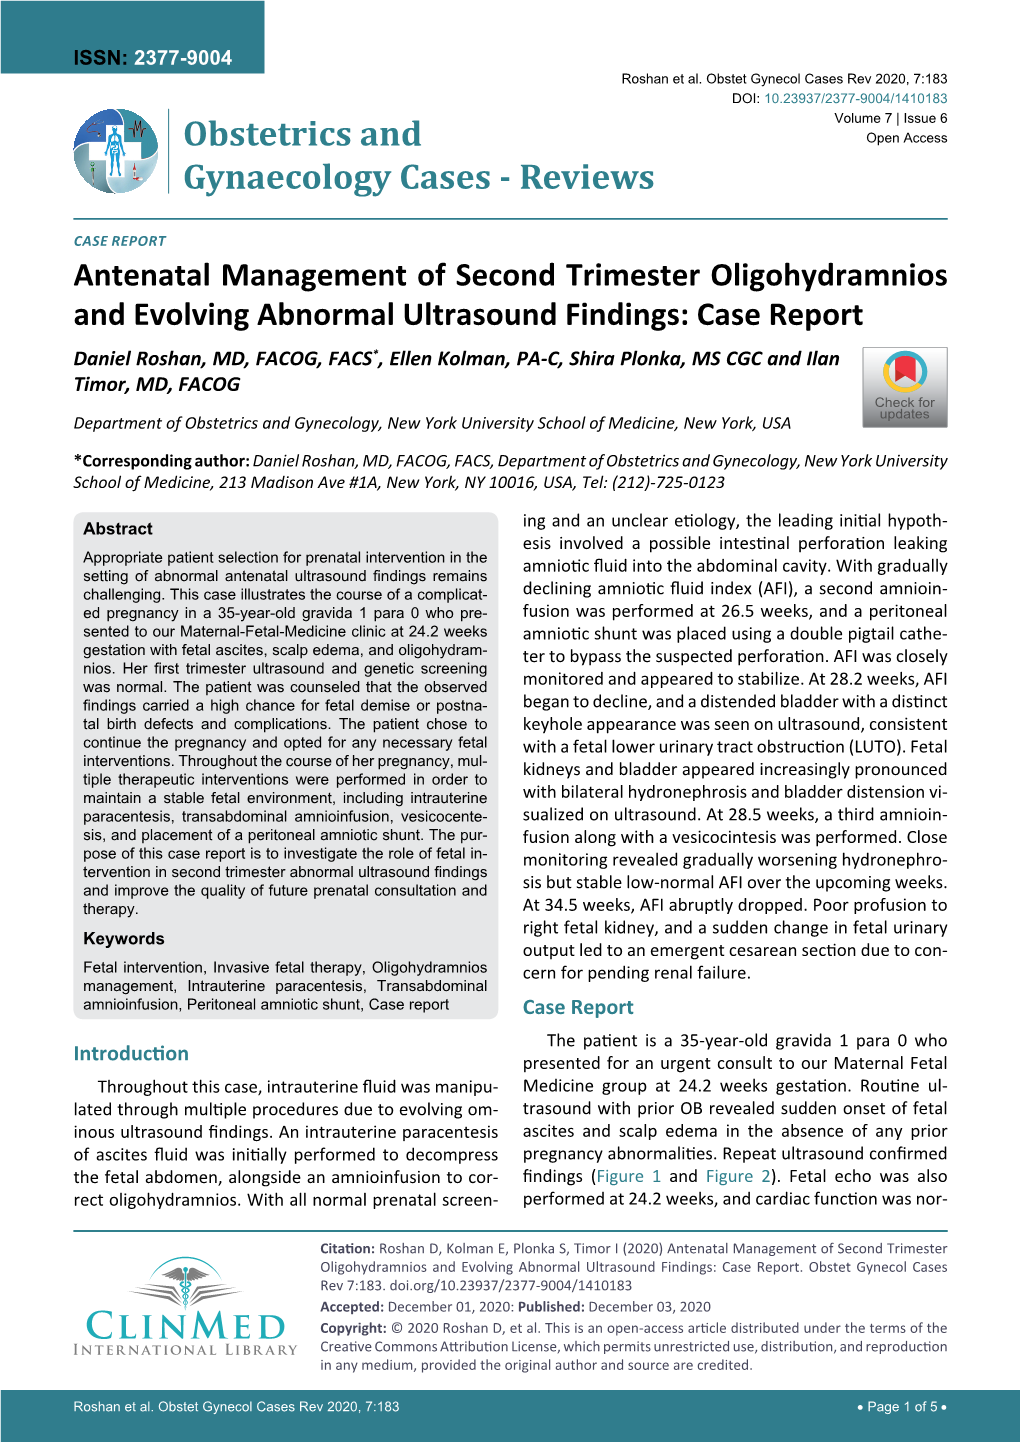 Antenatal Management of Second Trimester Oligohydramnios And